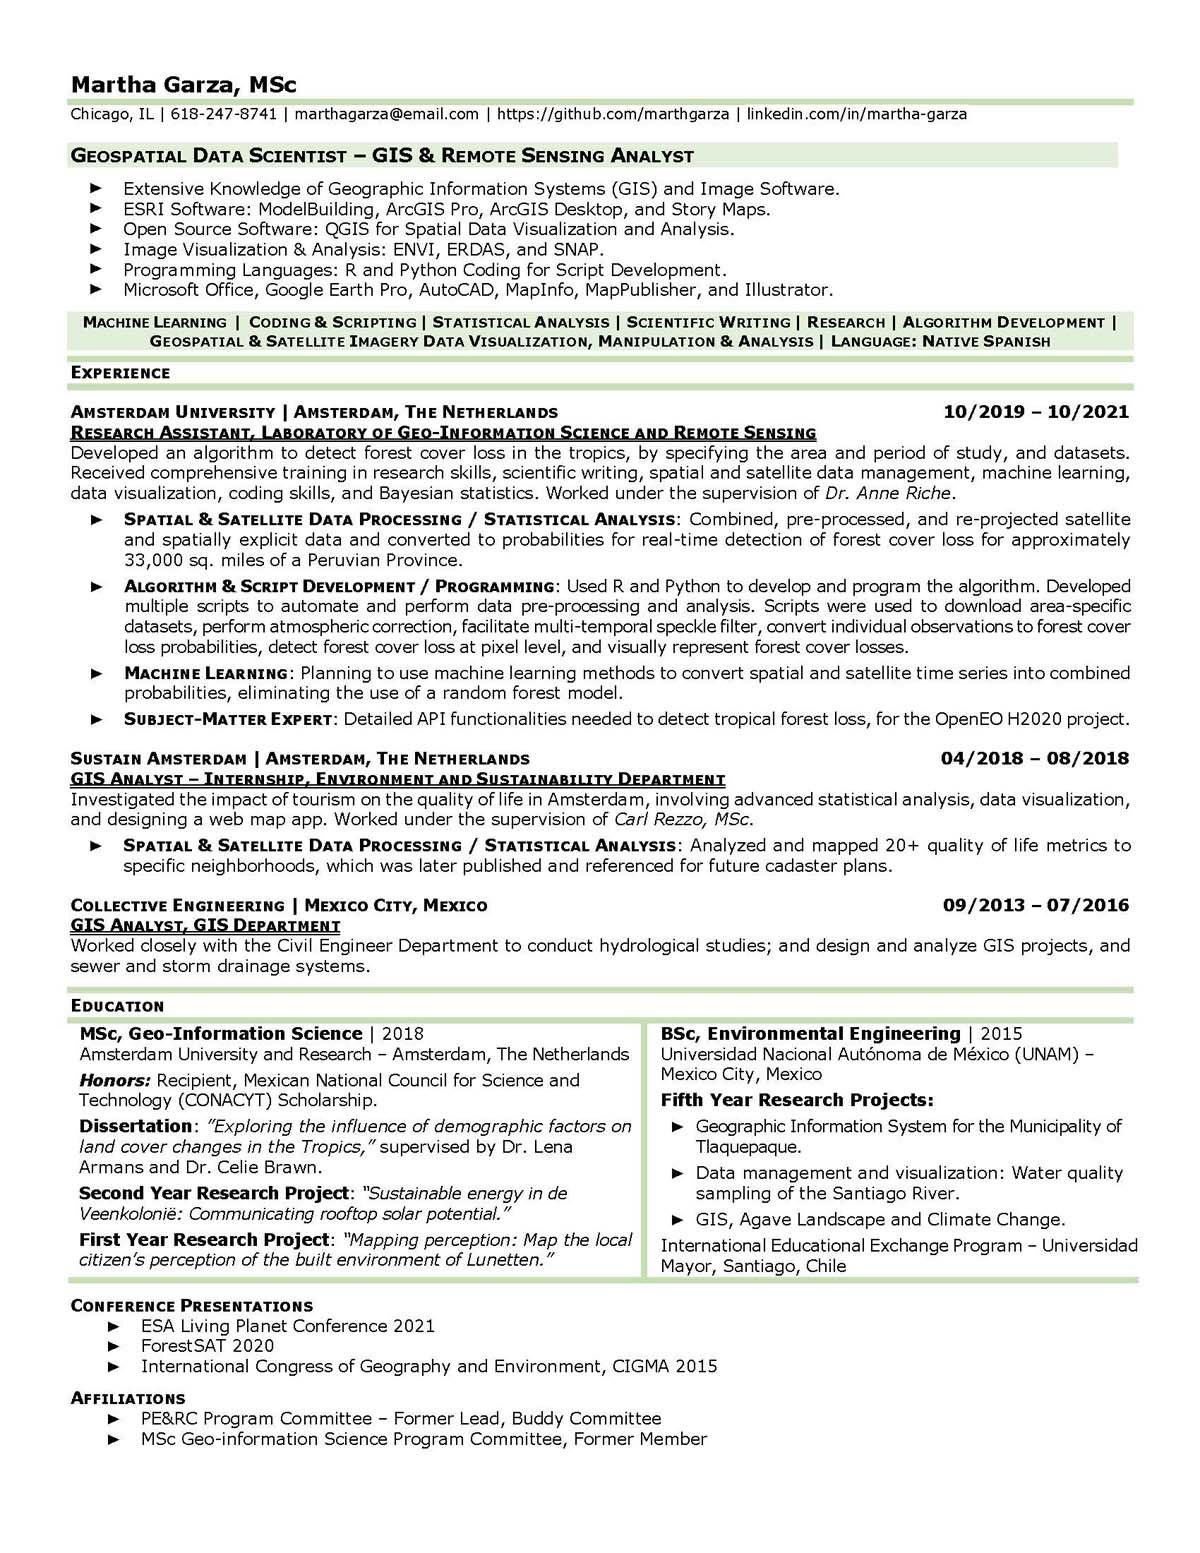 Sample resume: Information Technology, Low Experience, Chronological